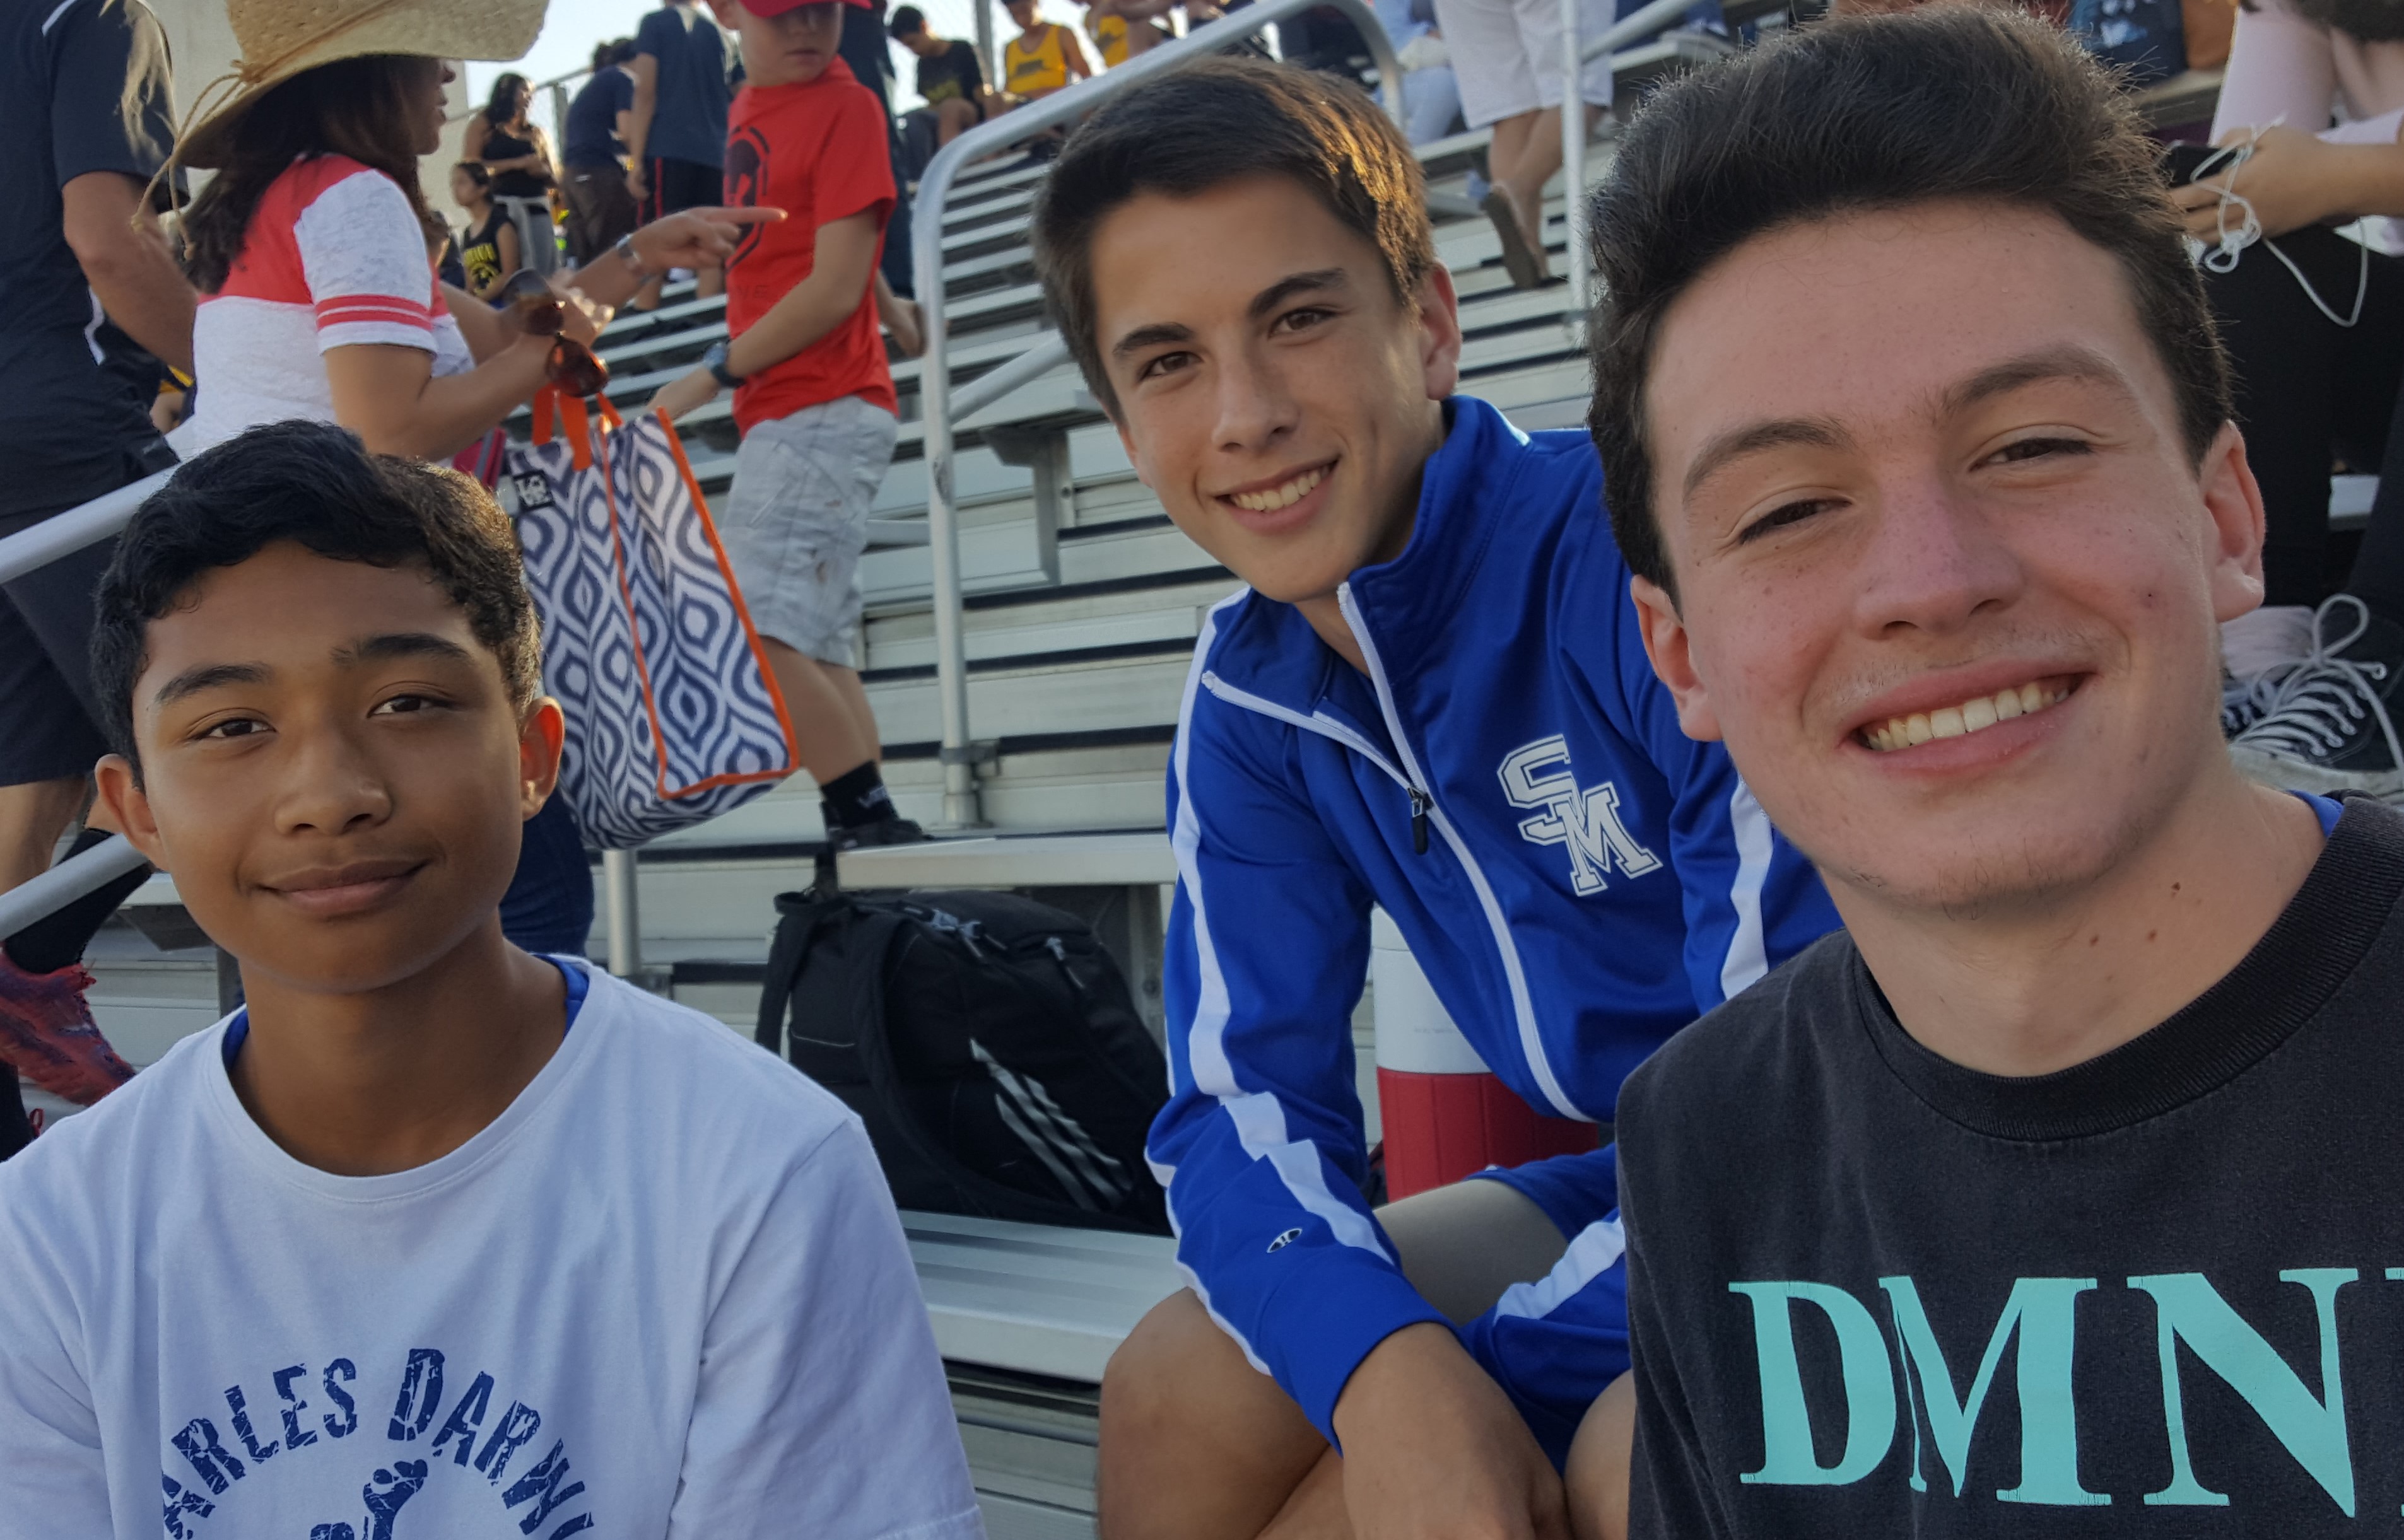 2016-09-09 - More guys in stands